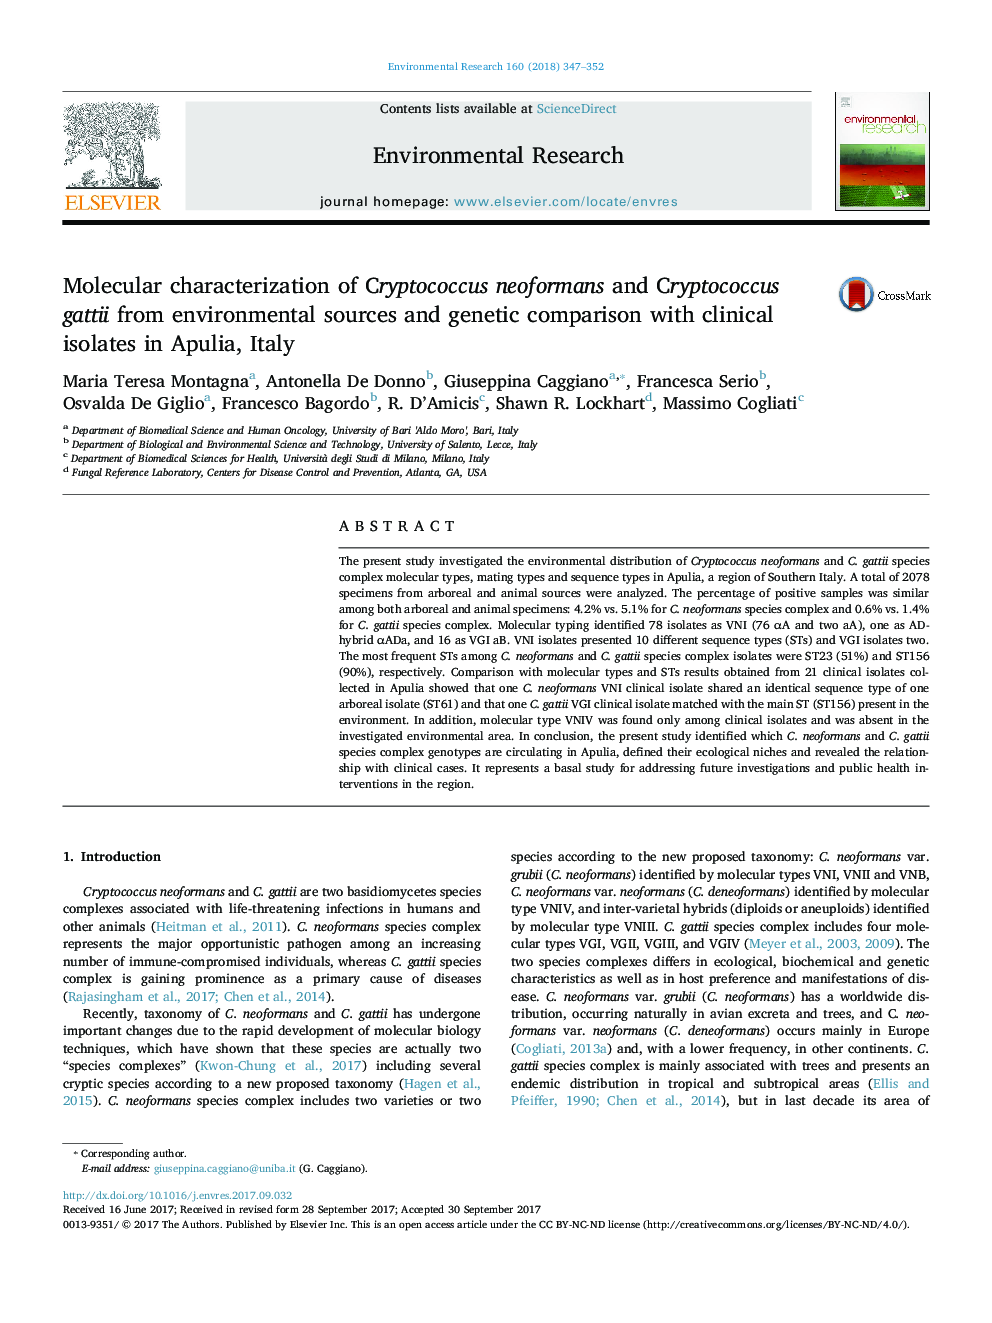 Molecular characterization of Cryptococcus neoformans and Cryptococcus gattii from environmental sources and genetic comparison with clinical isolates in Apulia, Italy